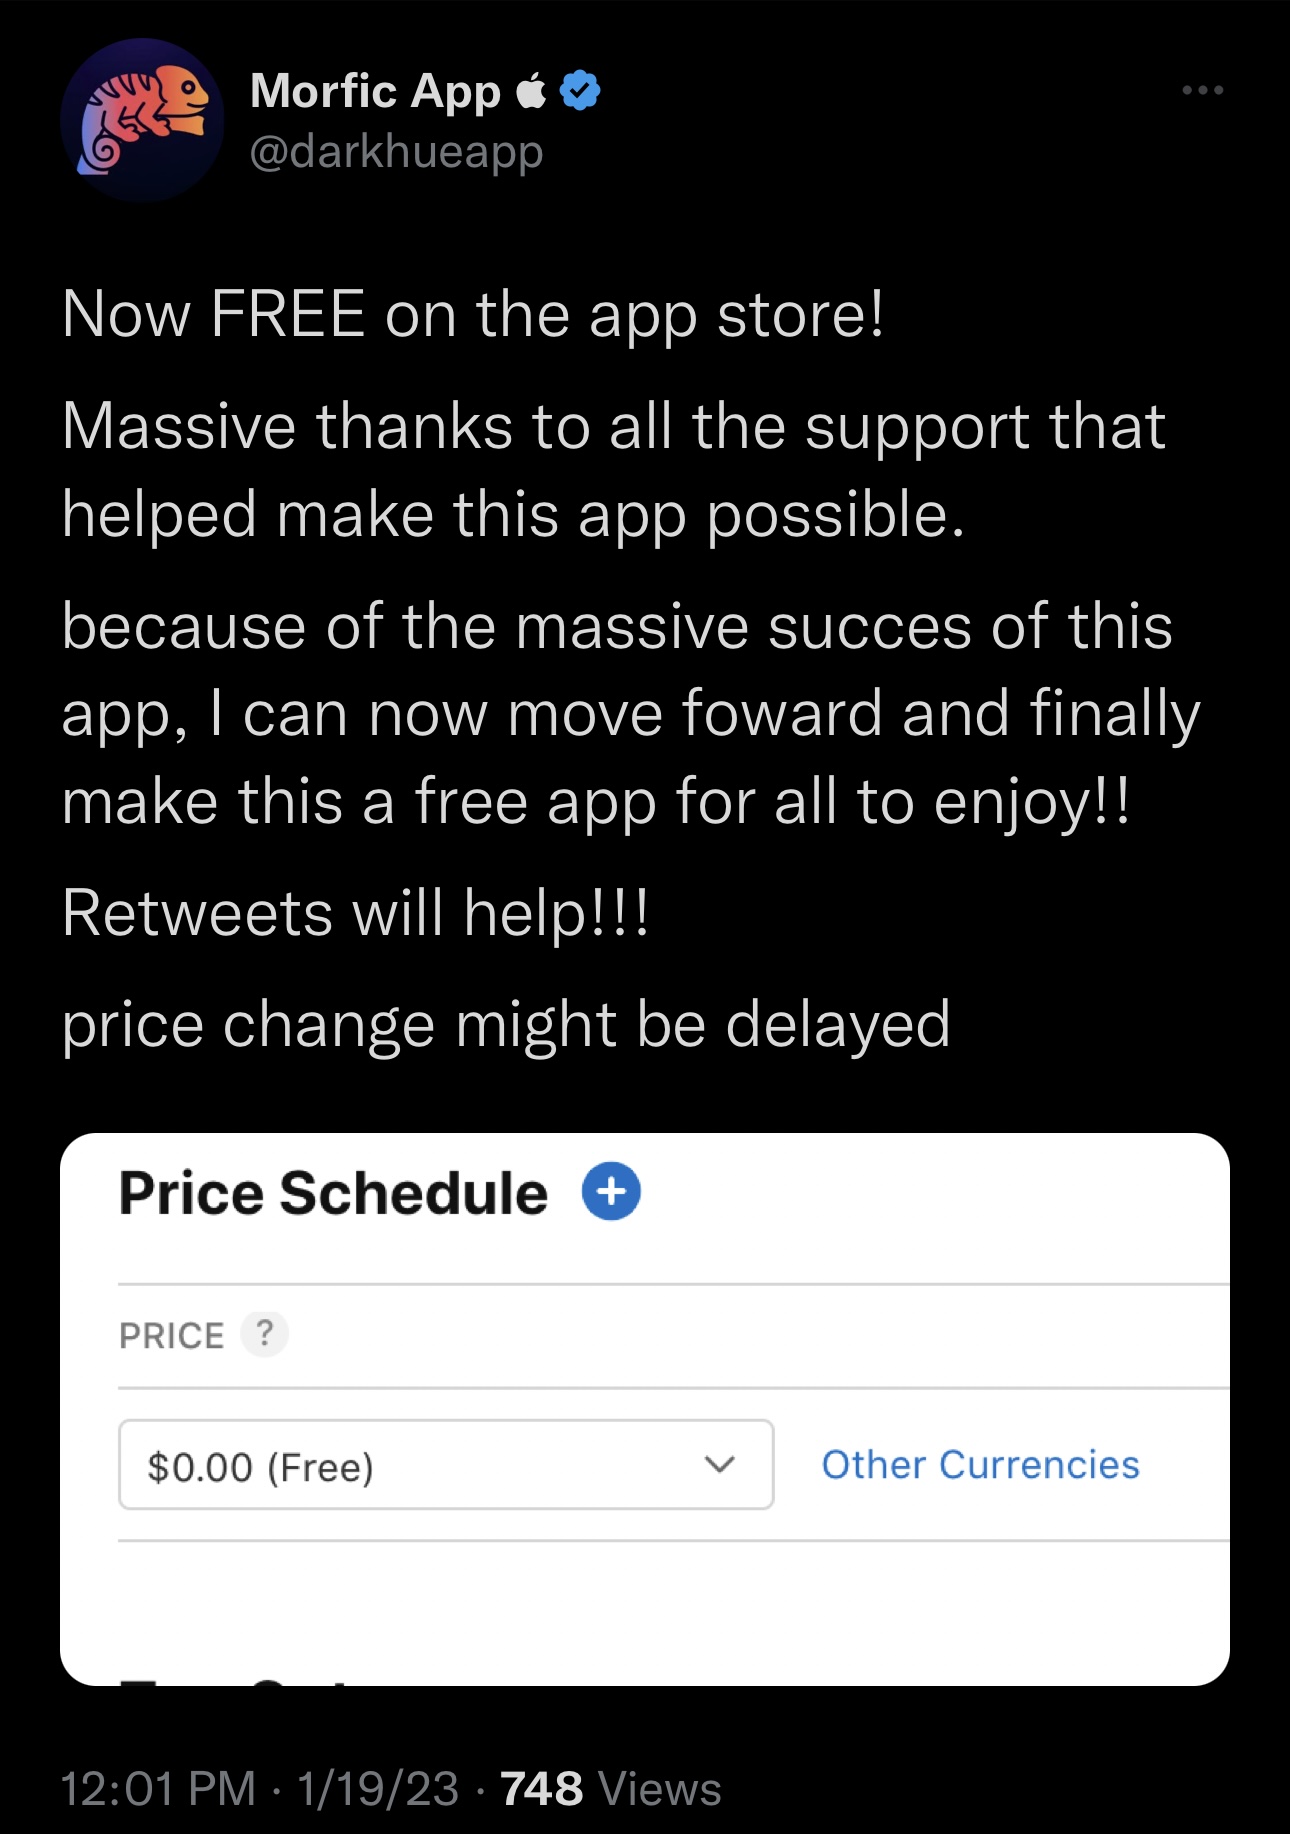 Morfic Twitter account announced the app going free following a successful app launch.